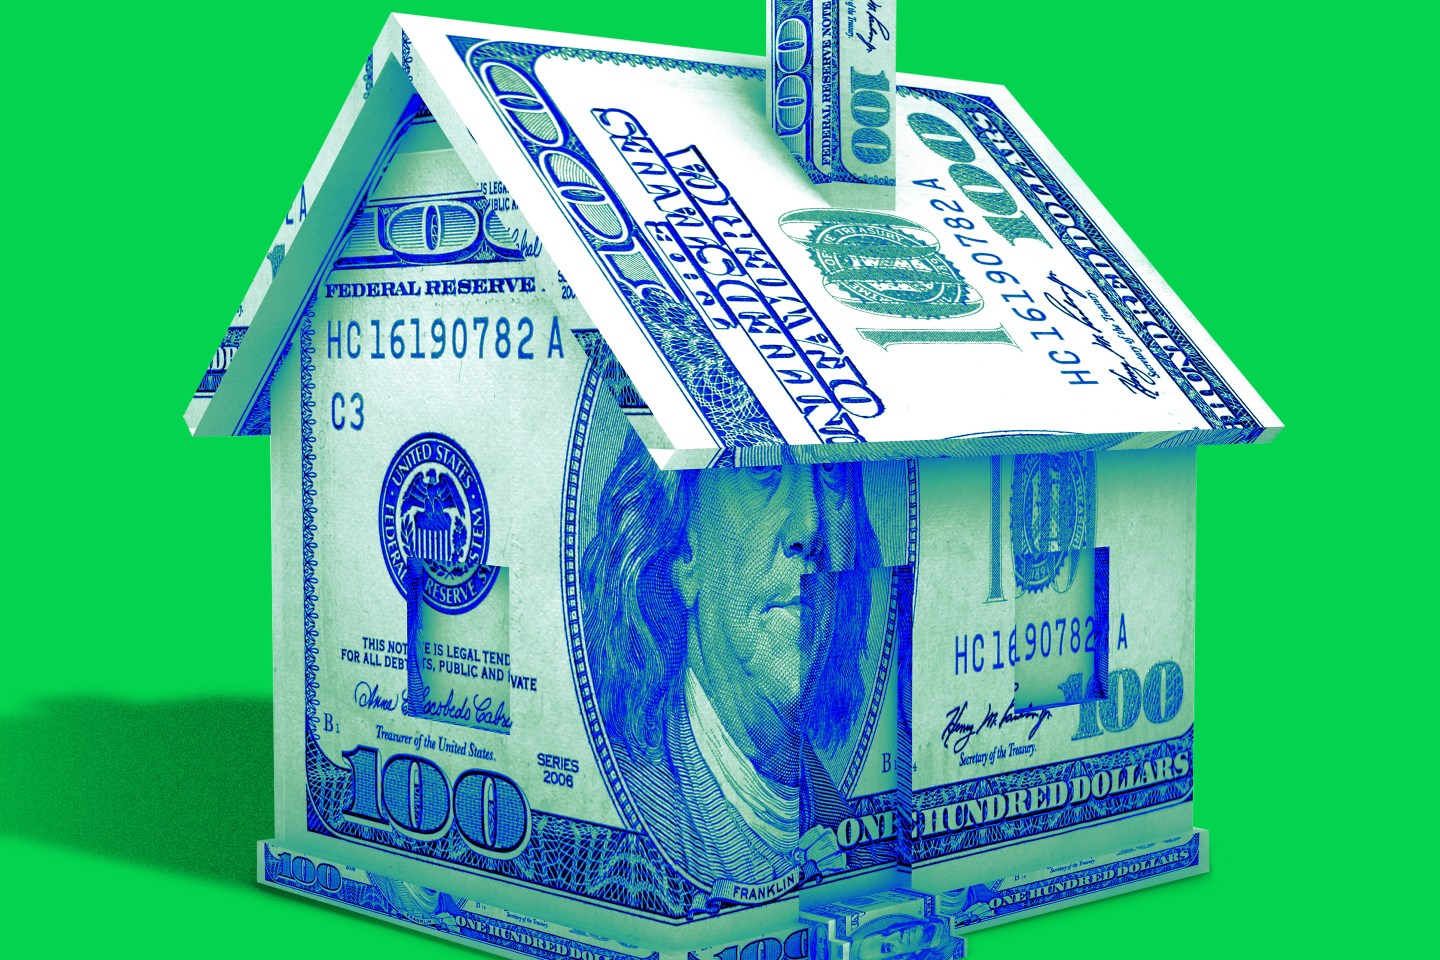 Photo illustration of a green and blue house made out of $100 bills.